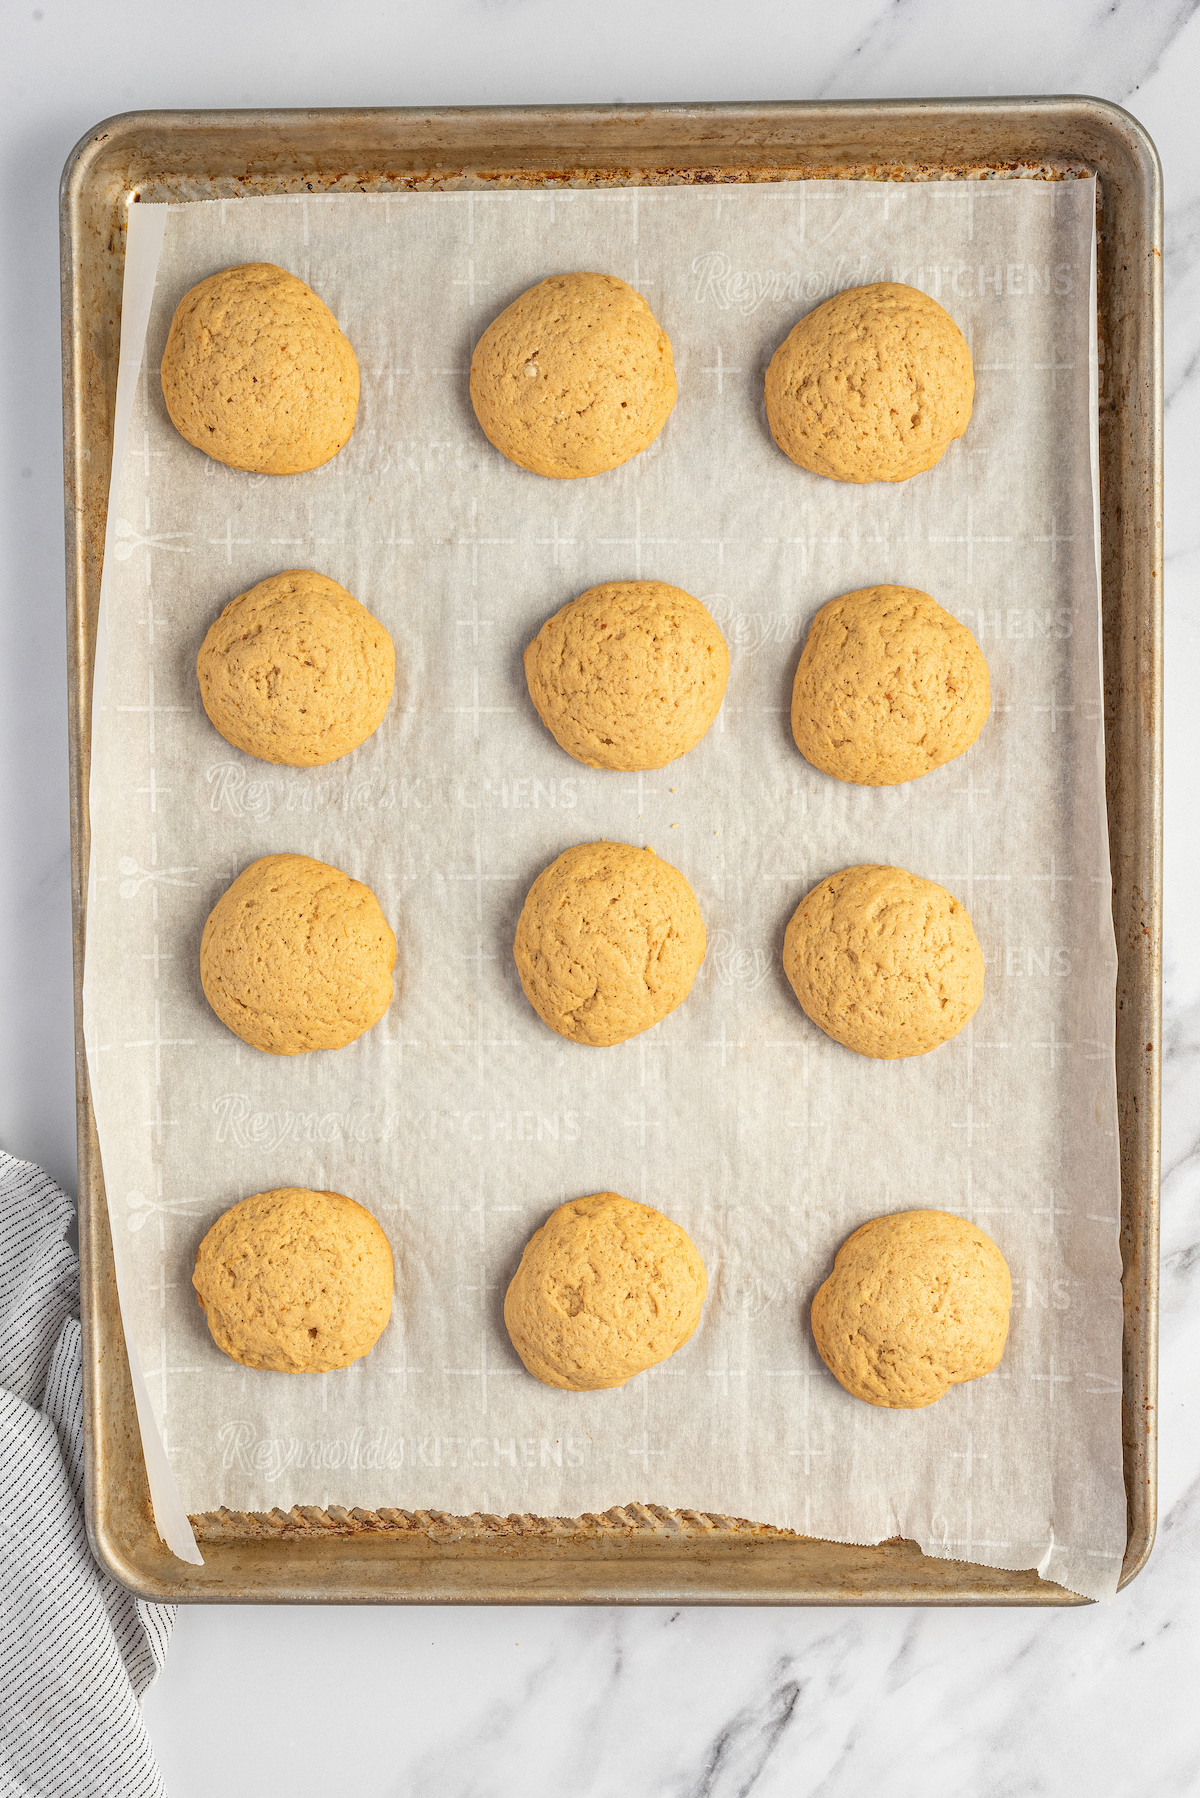 A parchment-lined baking sheet of baked sweet potato cookies.